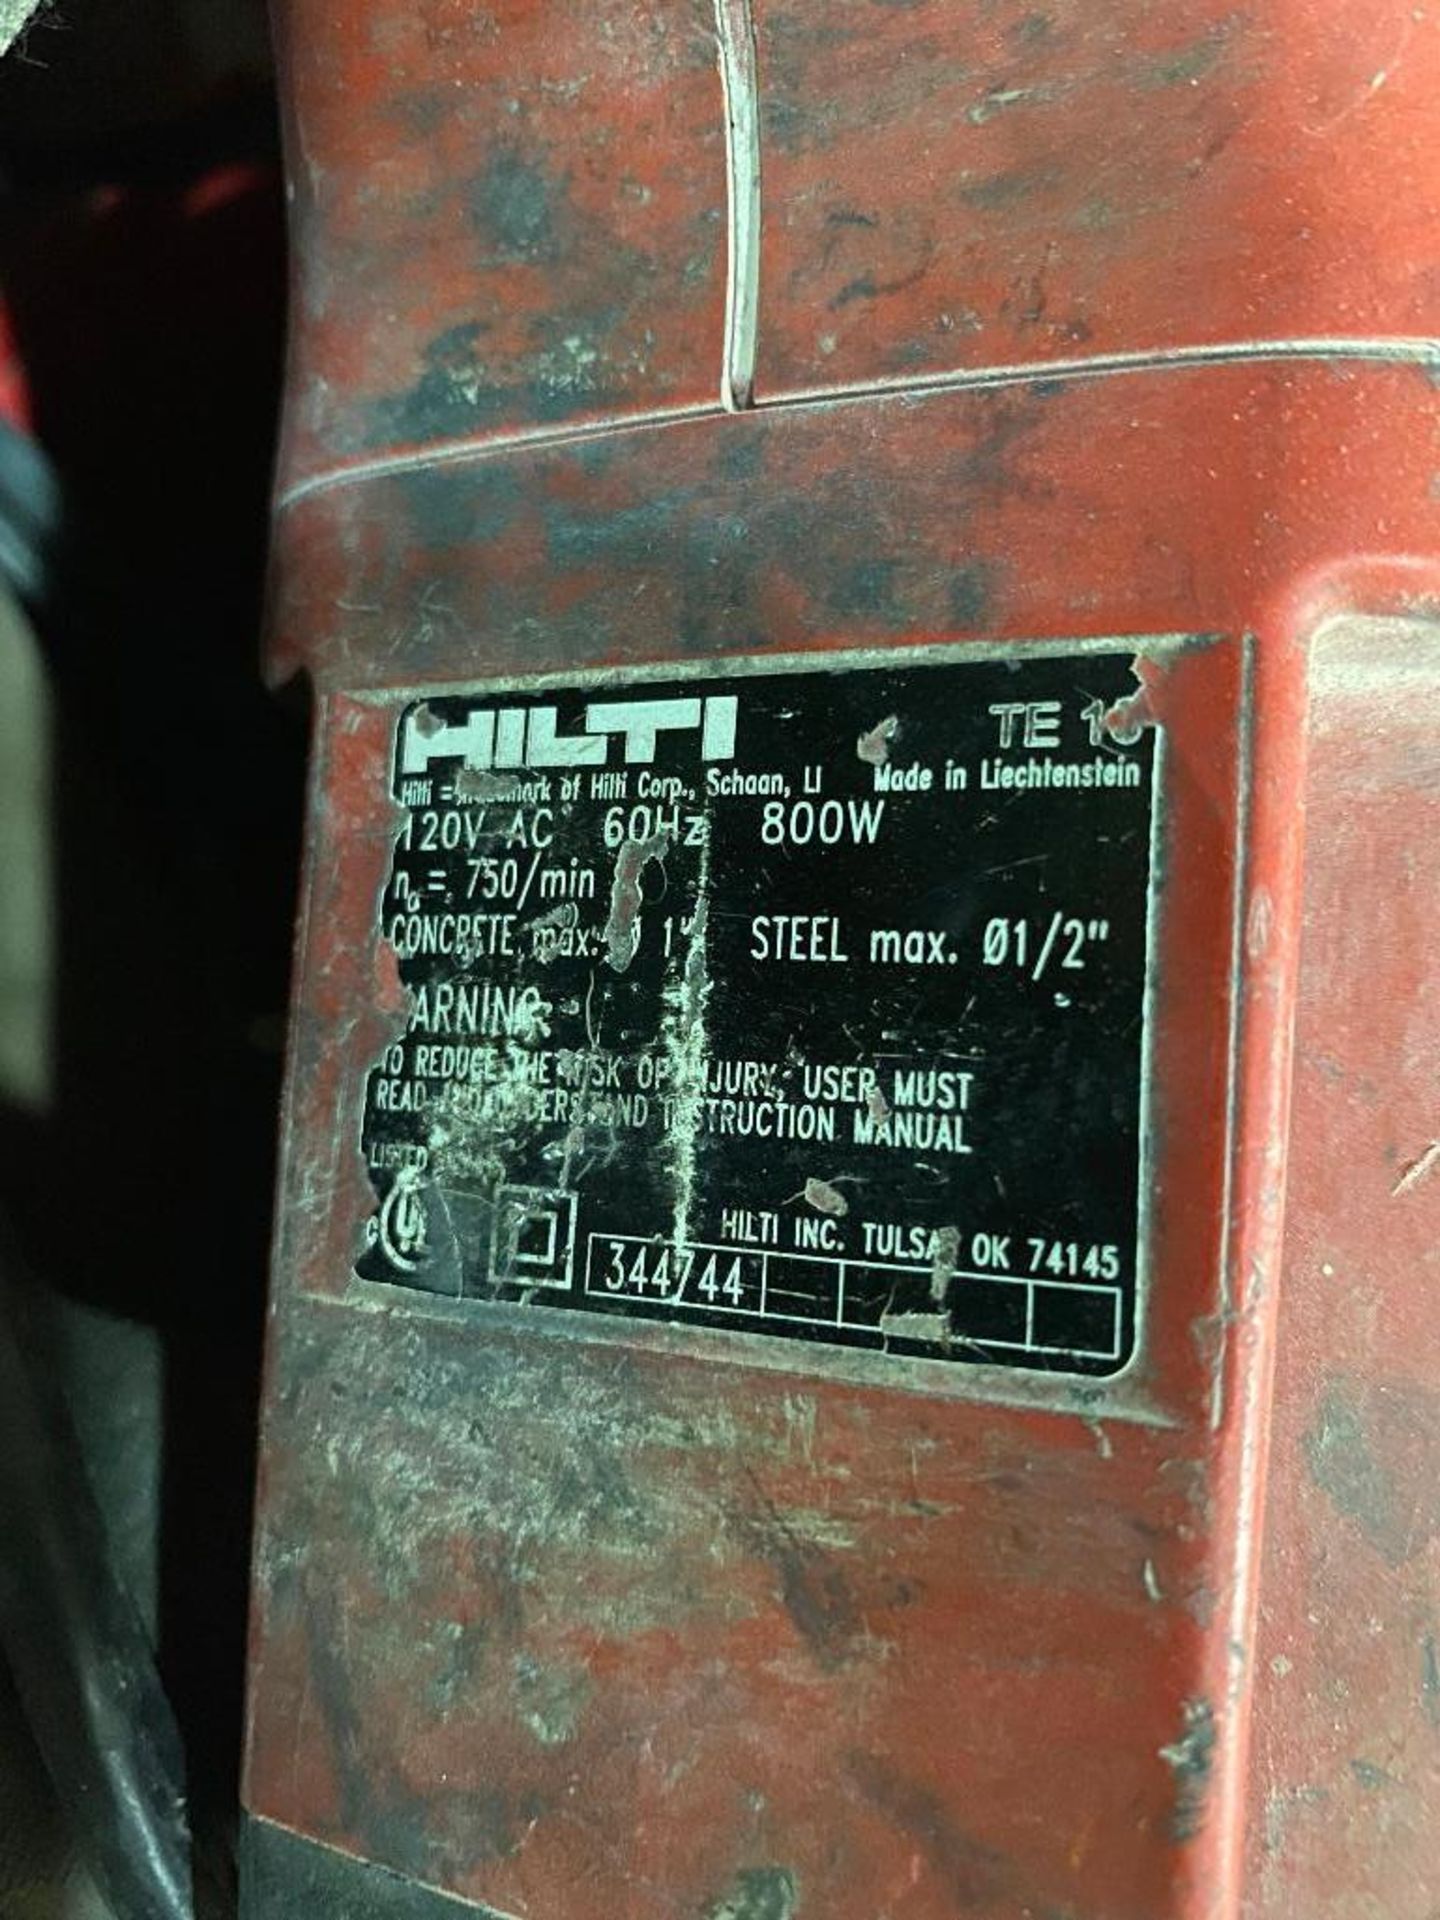 HILTI TE 16 Electric Rotary Hammer Drill - Image 2 of 3